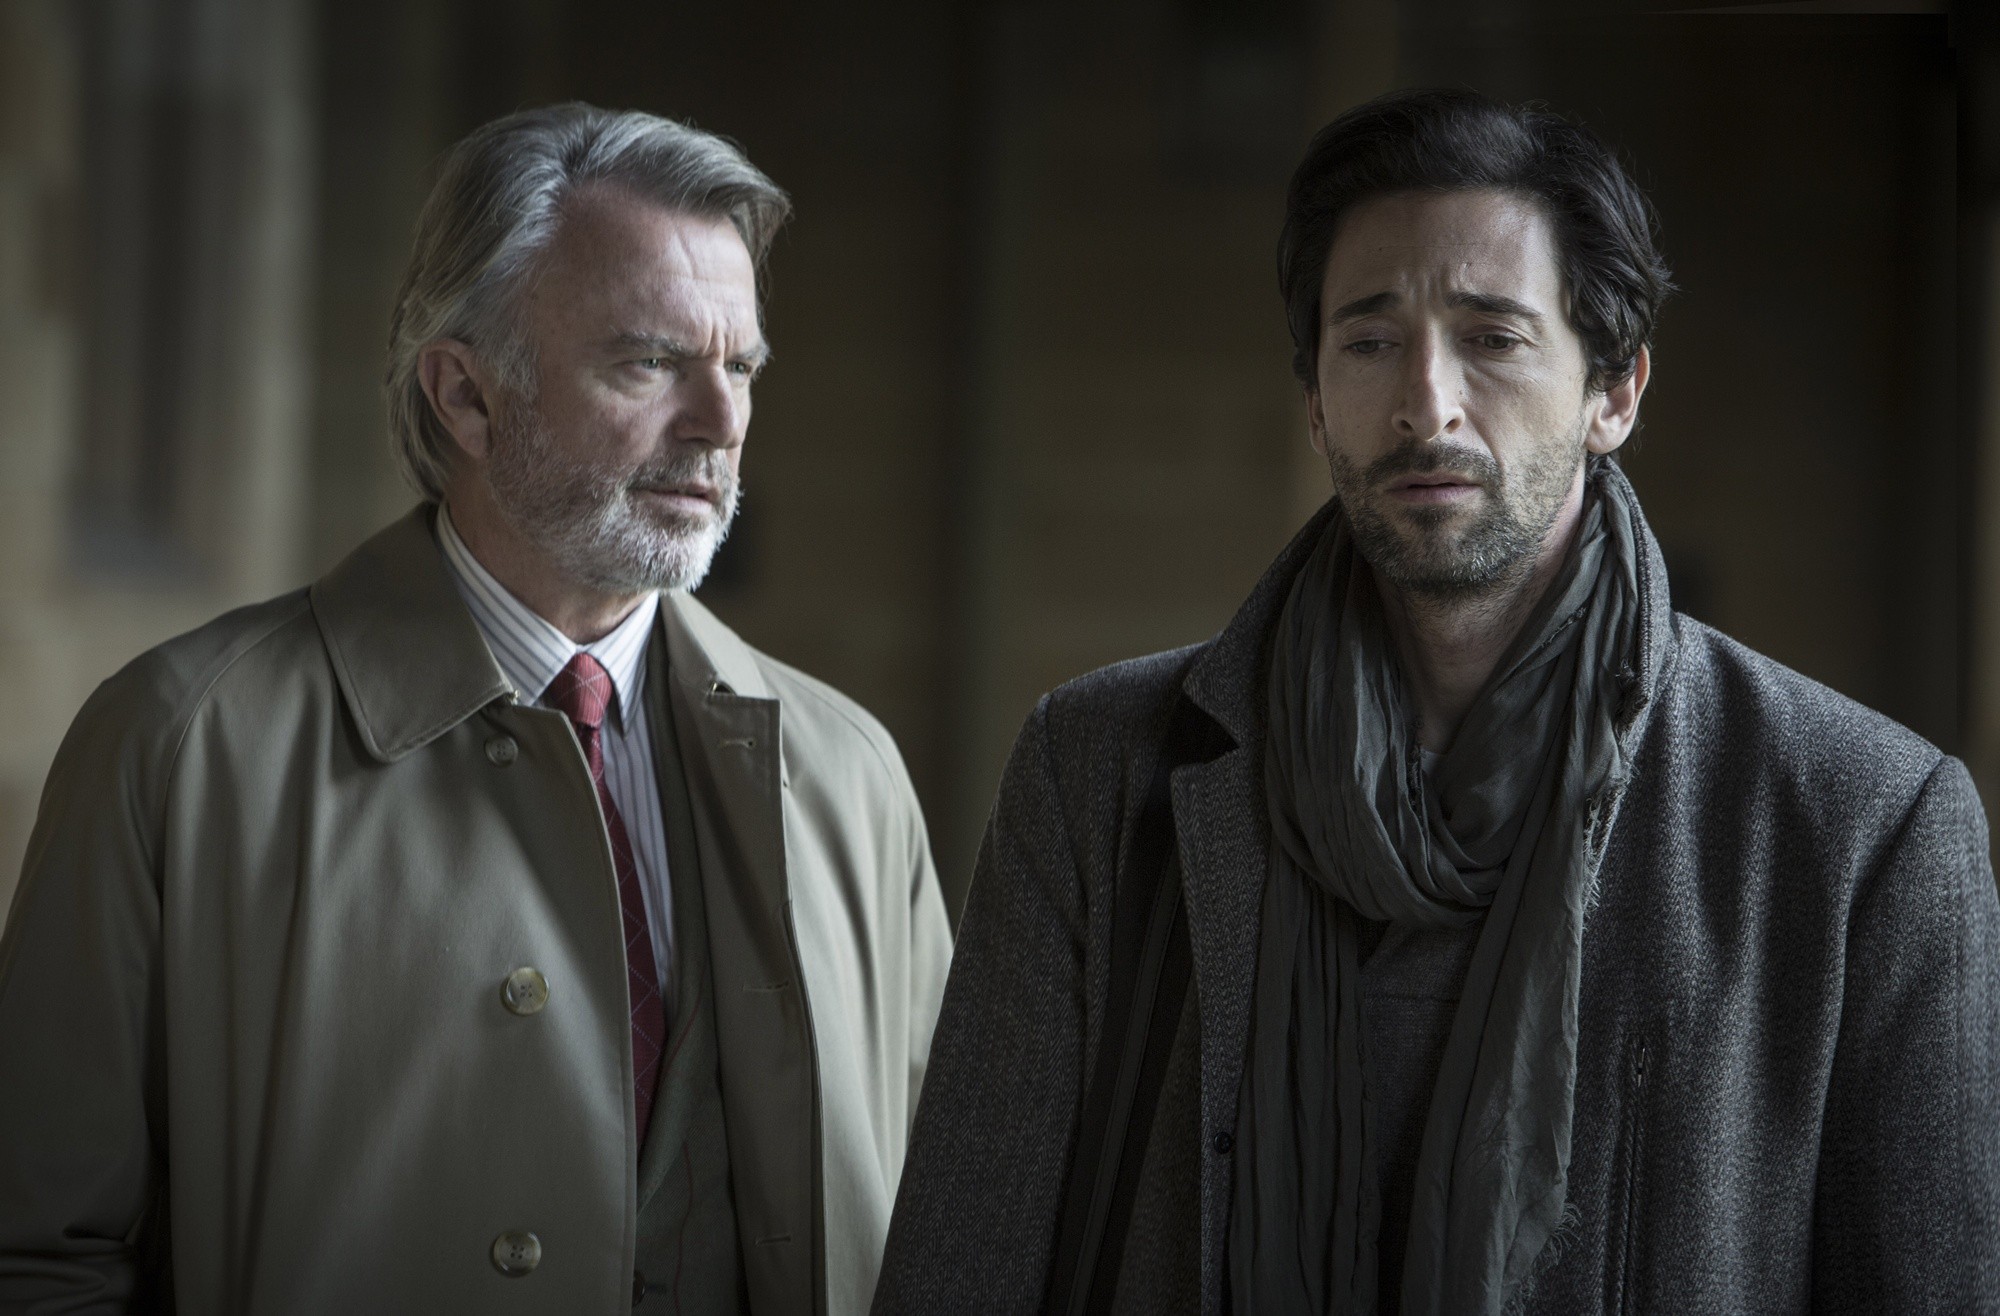 Sam Neill stars as Duncan Stewart and Adrien Brody stars as Peter Bower in Saban Films' Backtrack (2016)